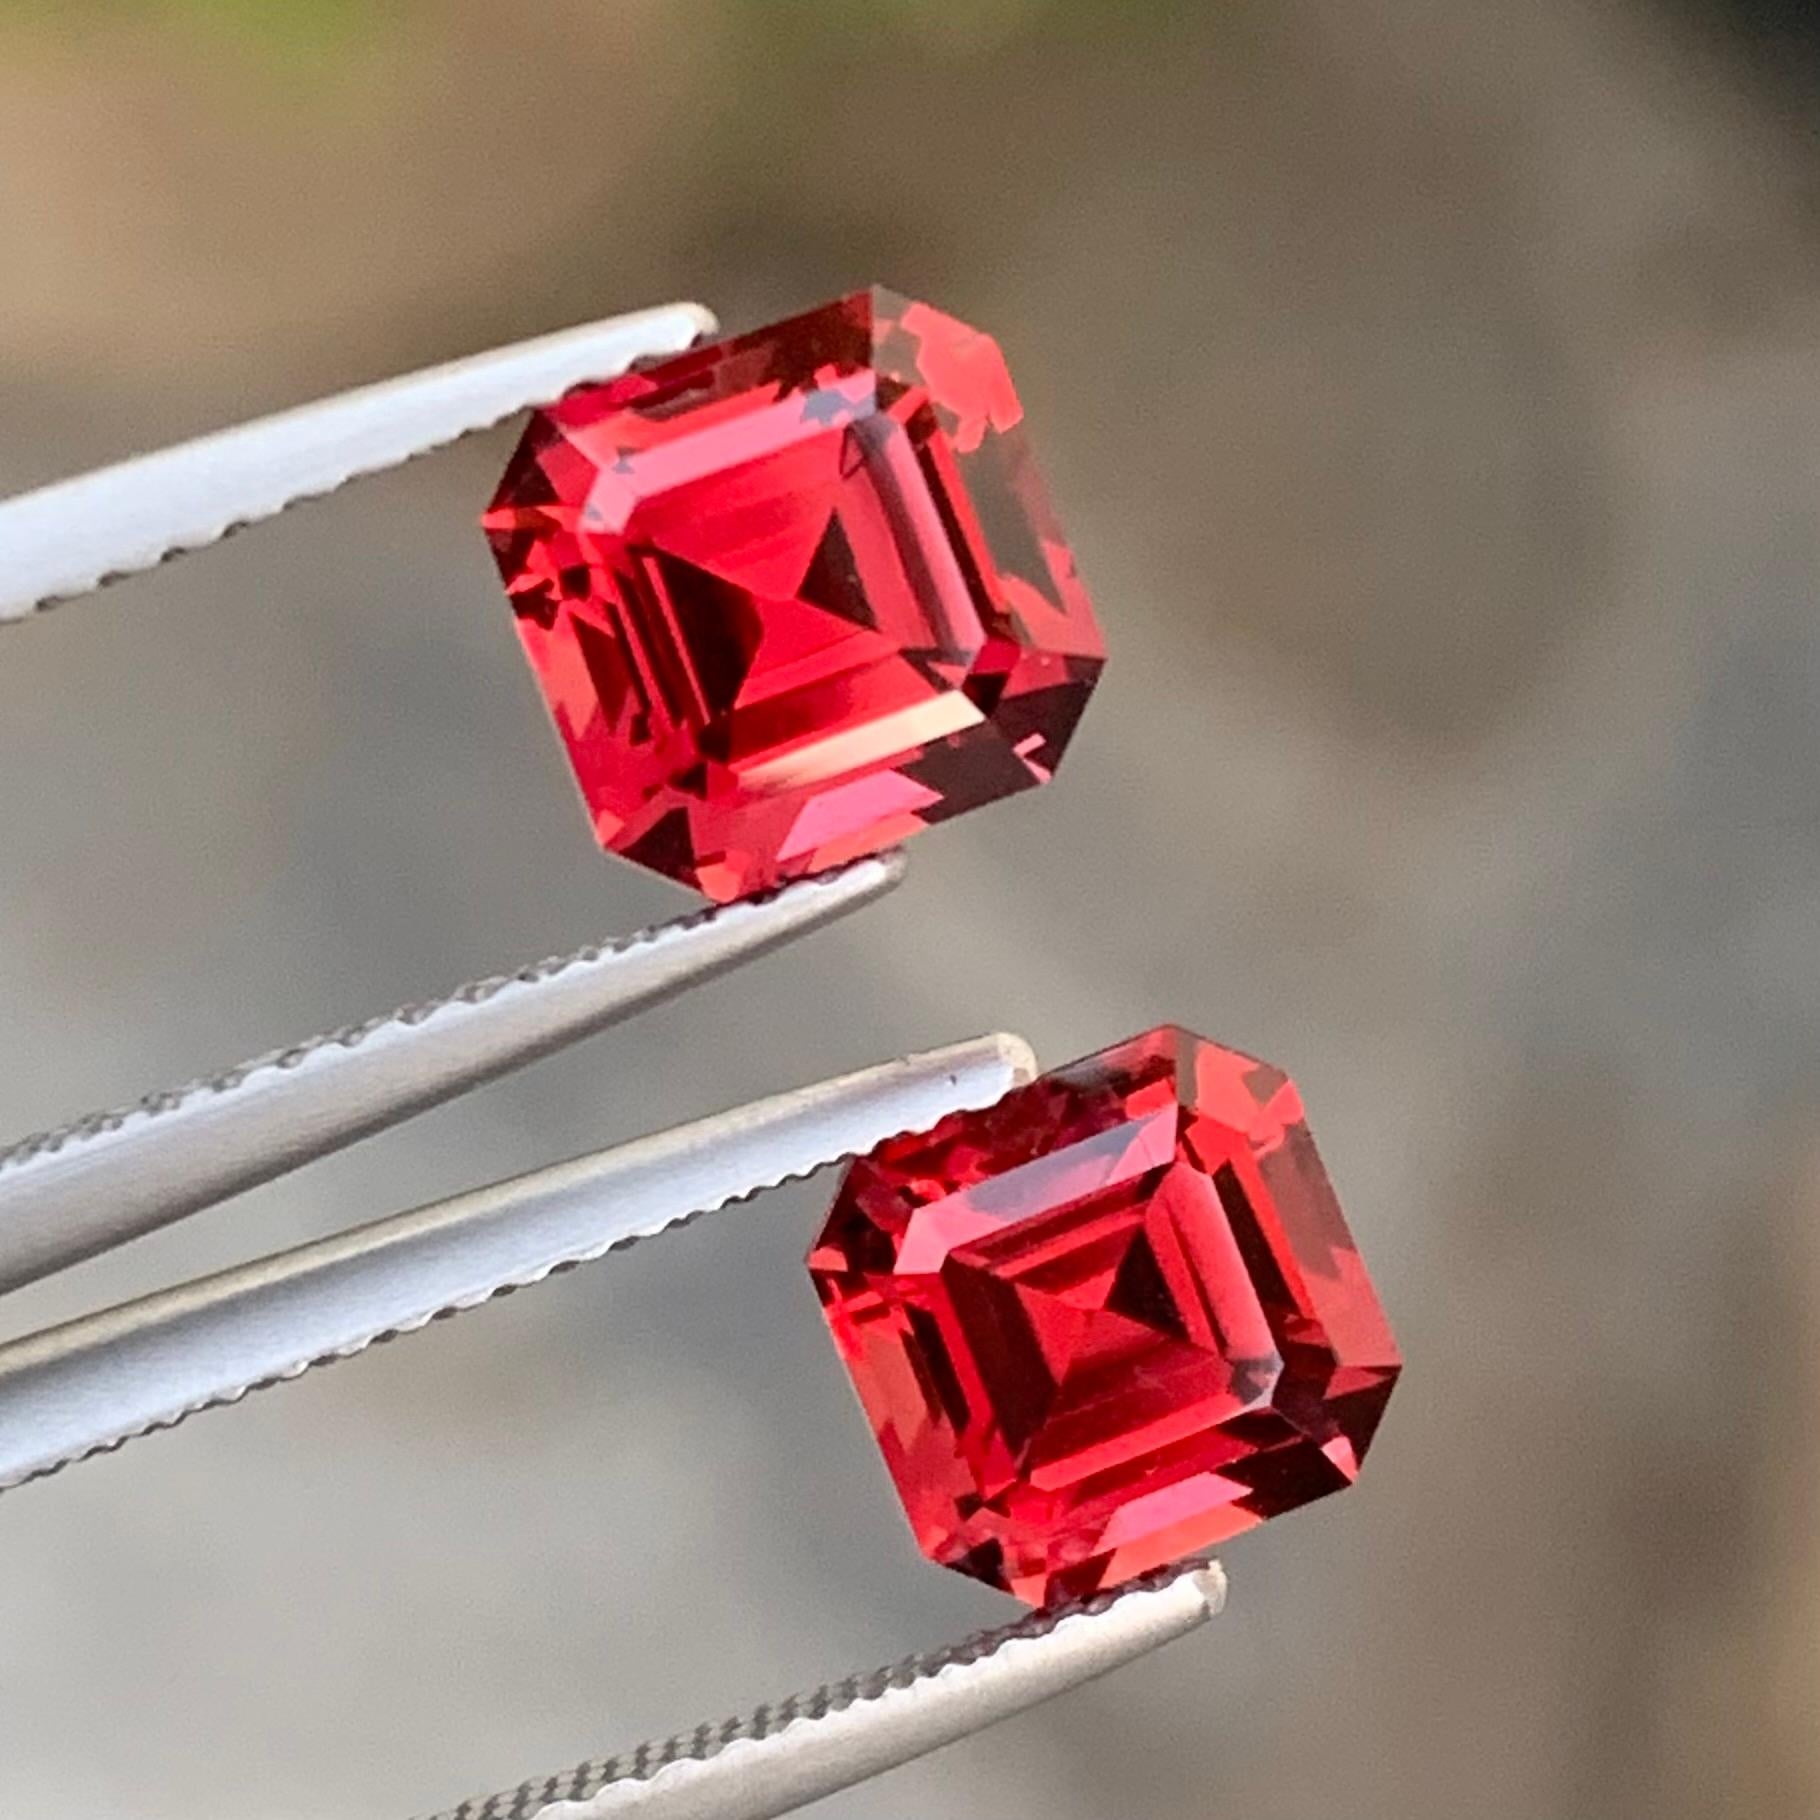 Faceted Rhodolite Garnet
Weight: 4.65 Carats Both
Dimension: 6.9x6.7x5.2 Mm
Origin: Tanzania Africa
Color: Red
Treatment: Non
Shape: Square
Cut: Asscher Cut
The Rhodolite resembles pomegranate seeds, since both are eternal both are love symbols.